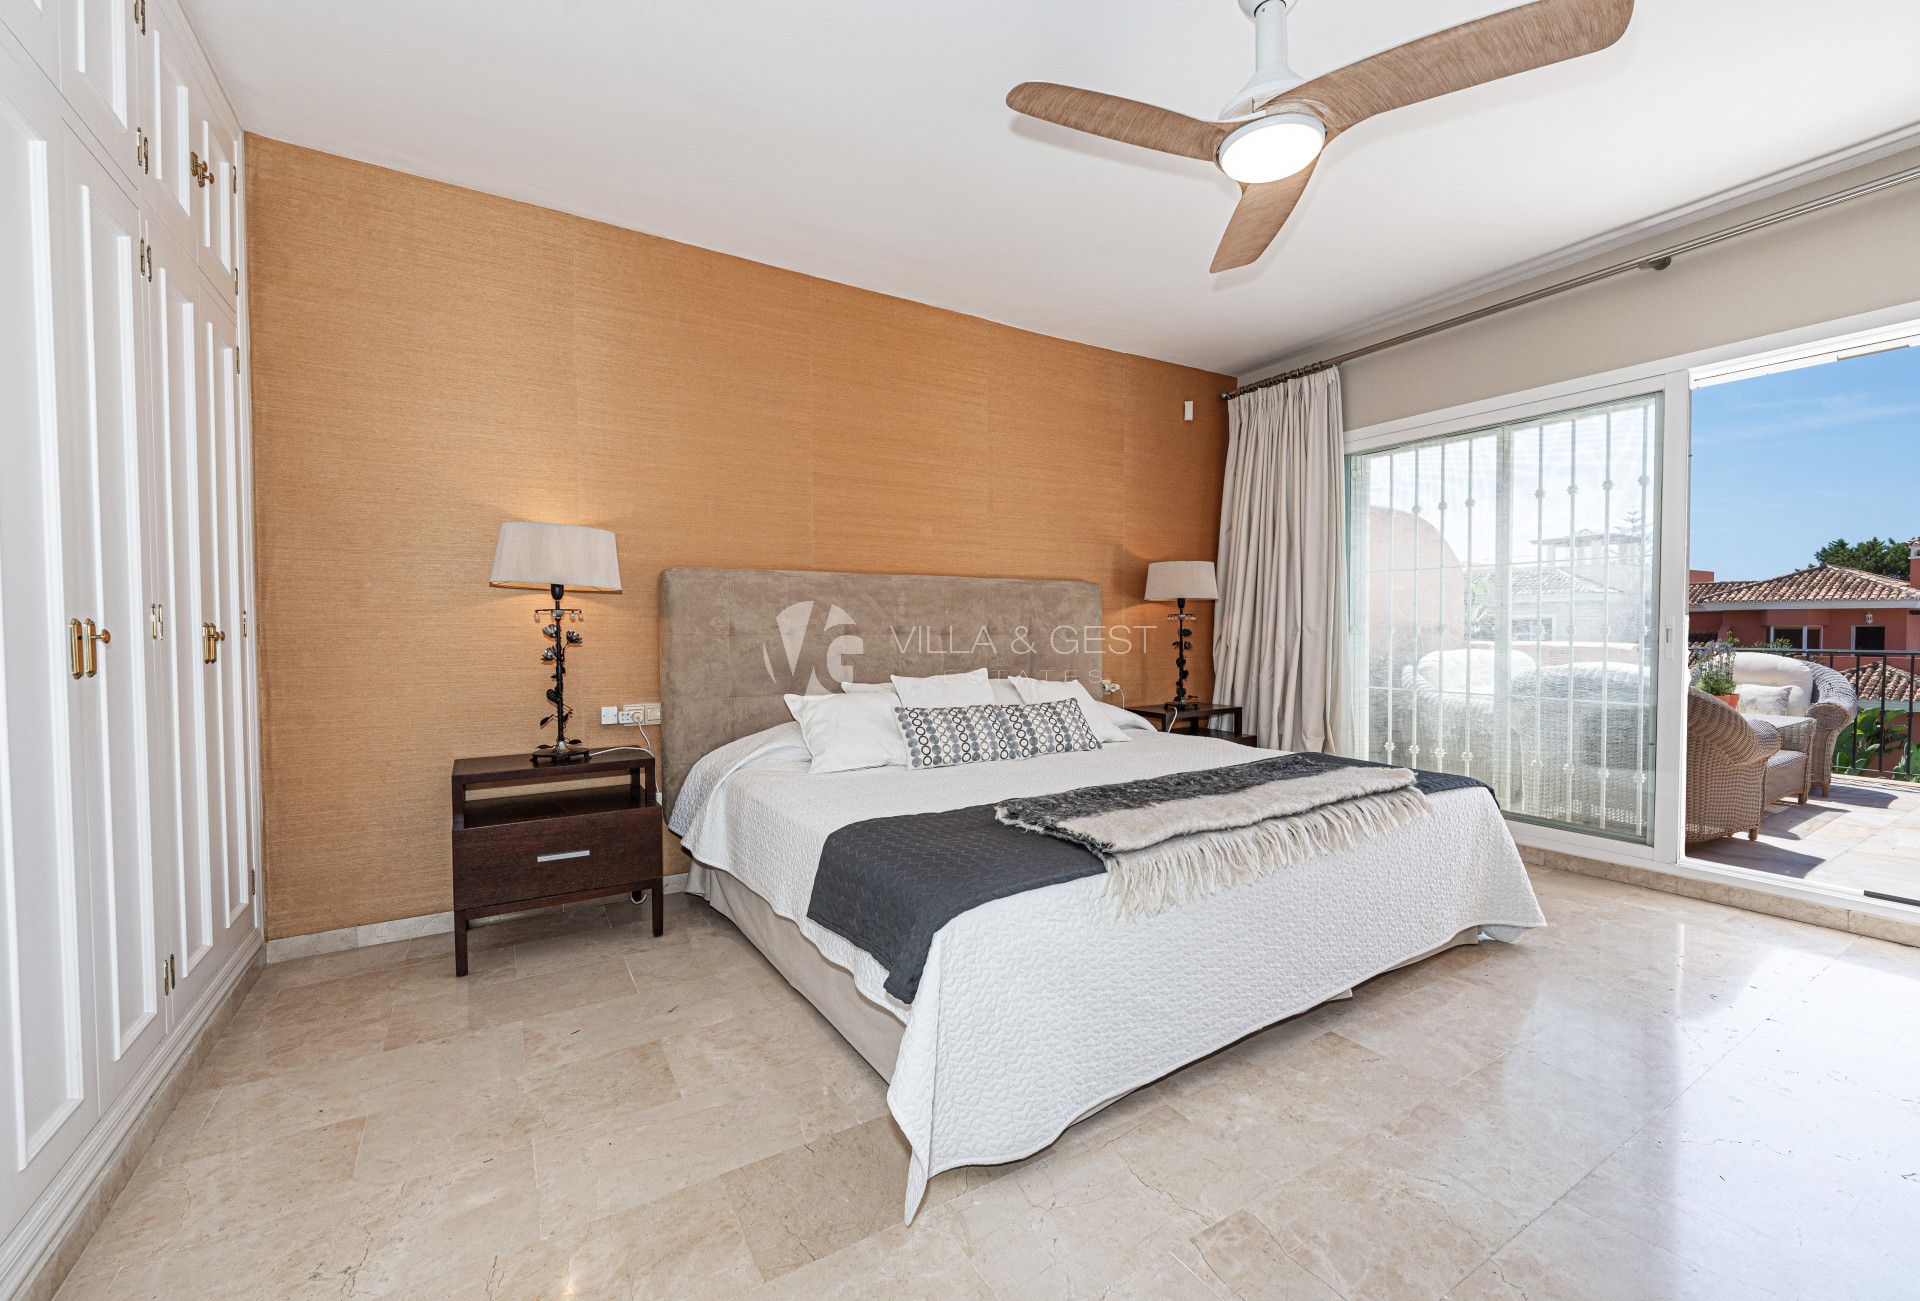 Expansive 3 Bedroom Duplex Penthouse Beachside in the New Golden Mile